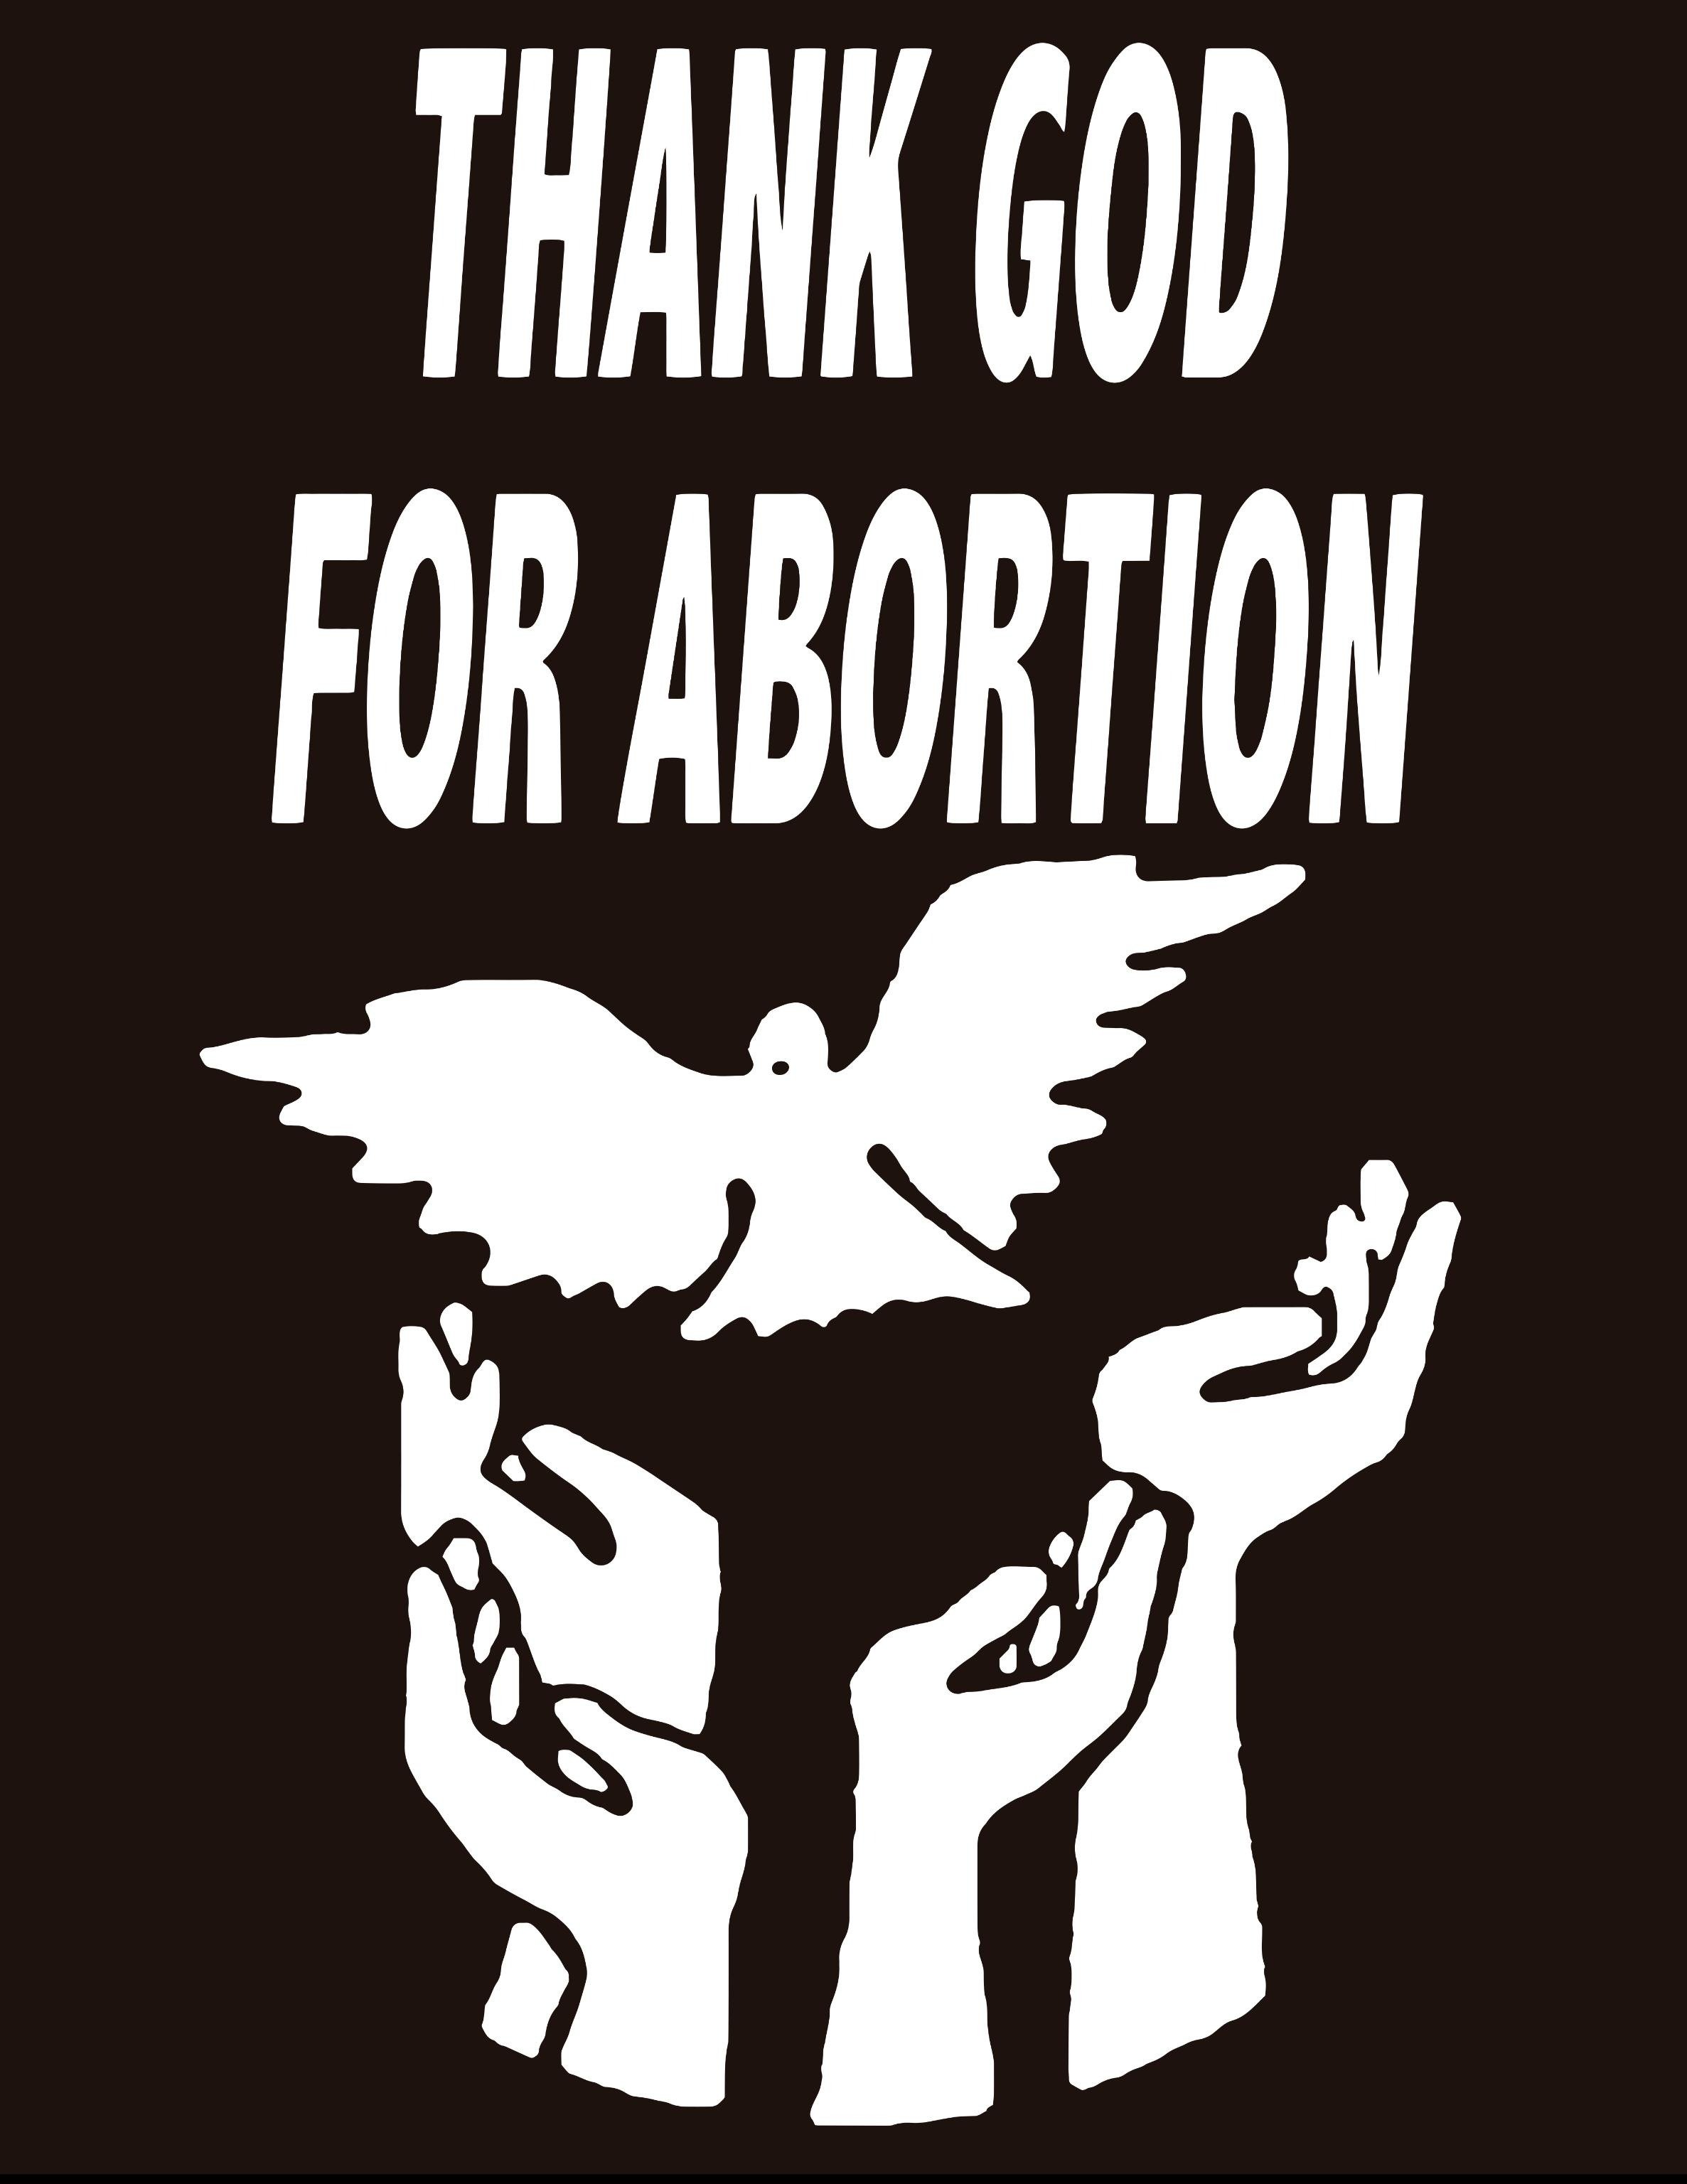 Thank God for Abortion